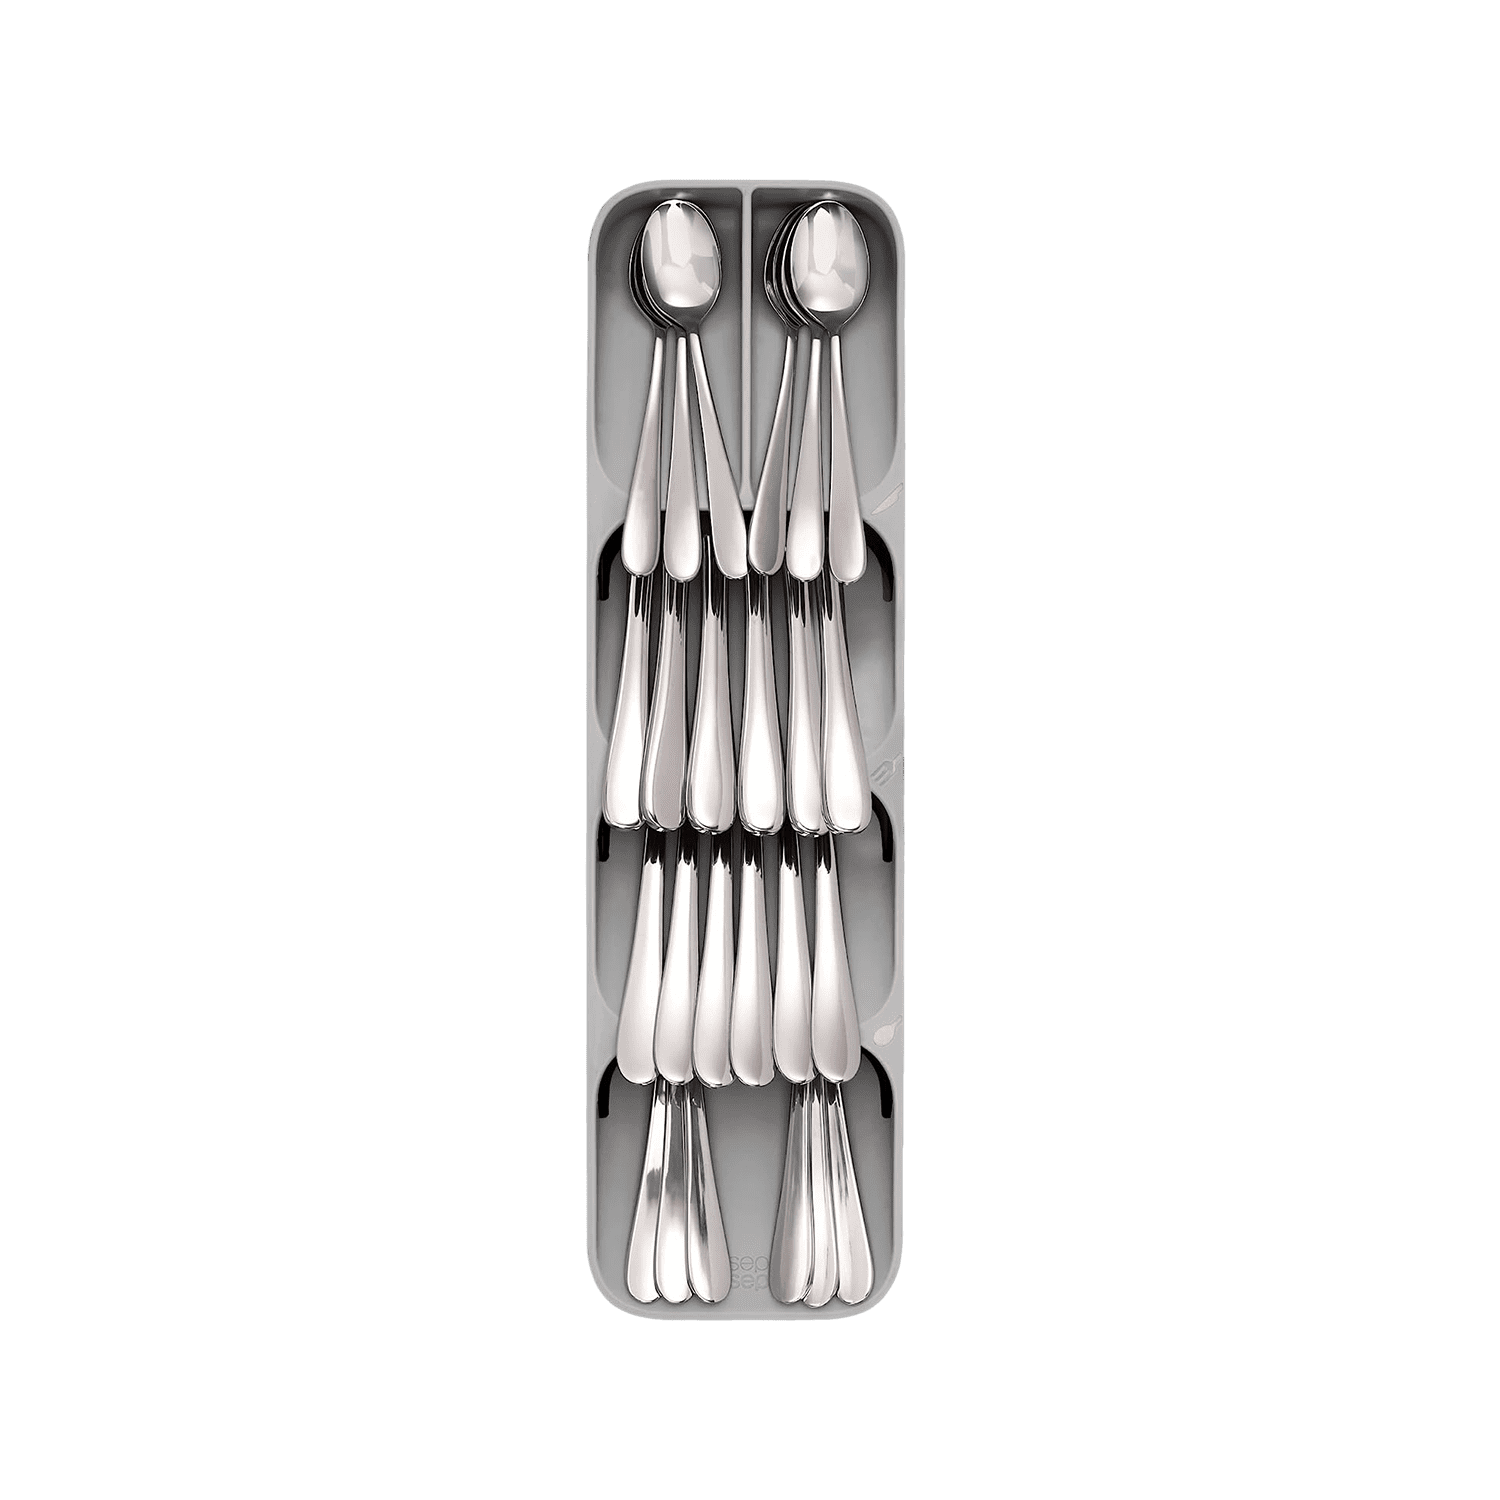 http://cdn.apartmenttherapy.info/image/upload/v1690818139/at/Org%20Awards%202023/products/joseph-joseph-drawerstore-compact-cutlery-silverware-organizer.png